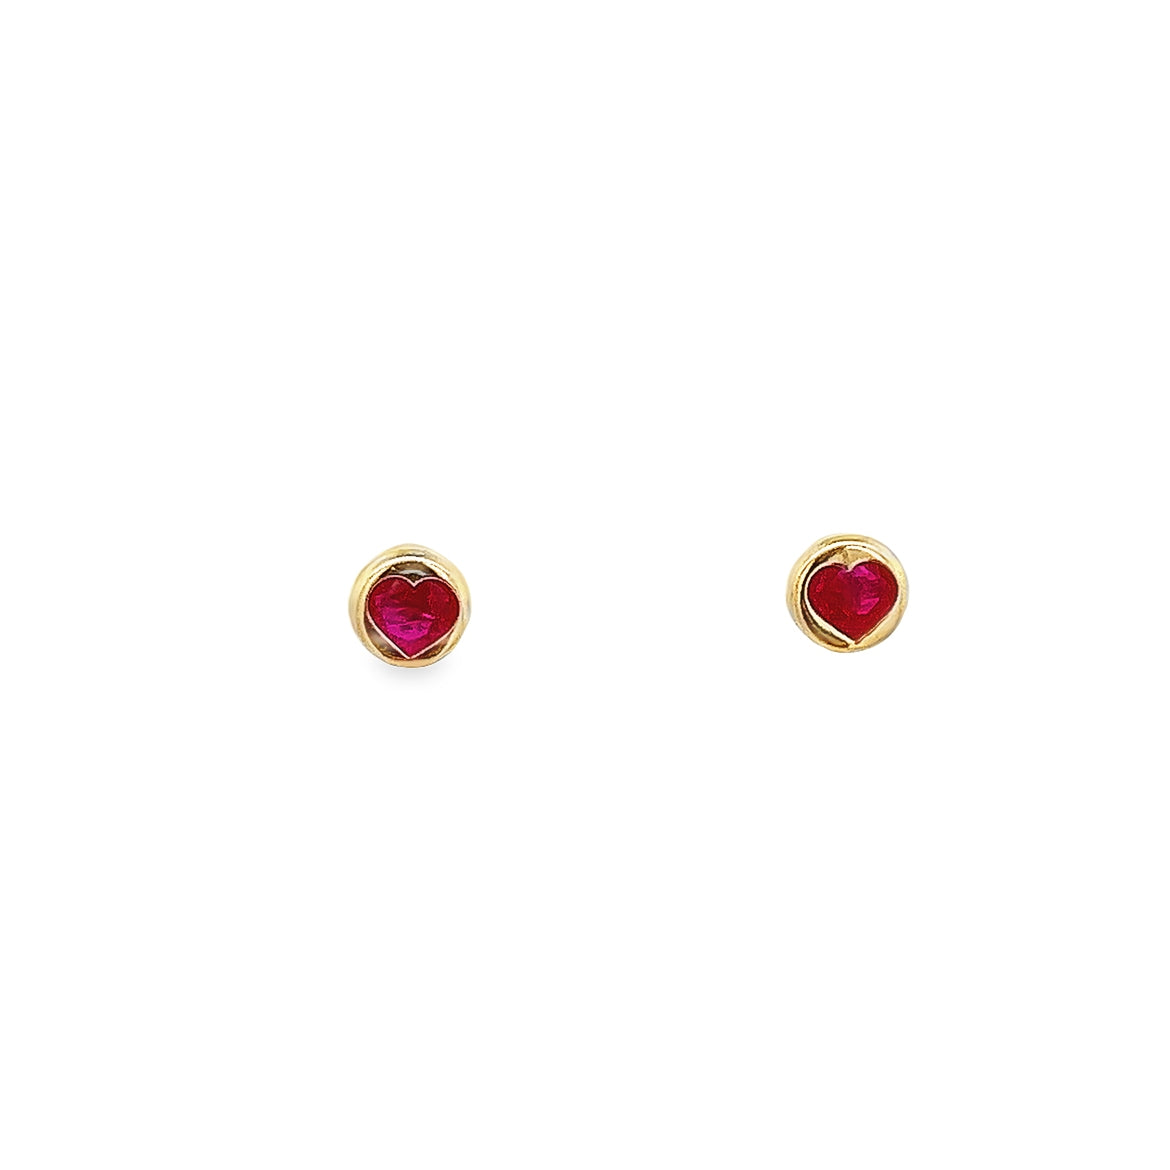 14K GOLD HEART WITH RED CRYSTAL CENTER EARRINGS